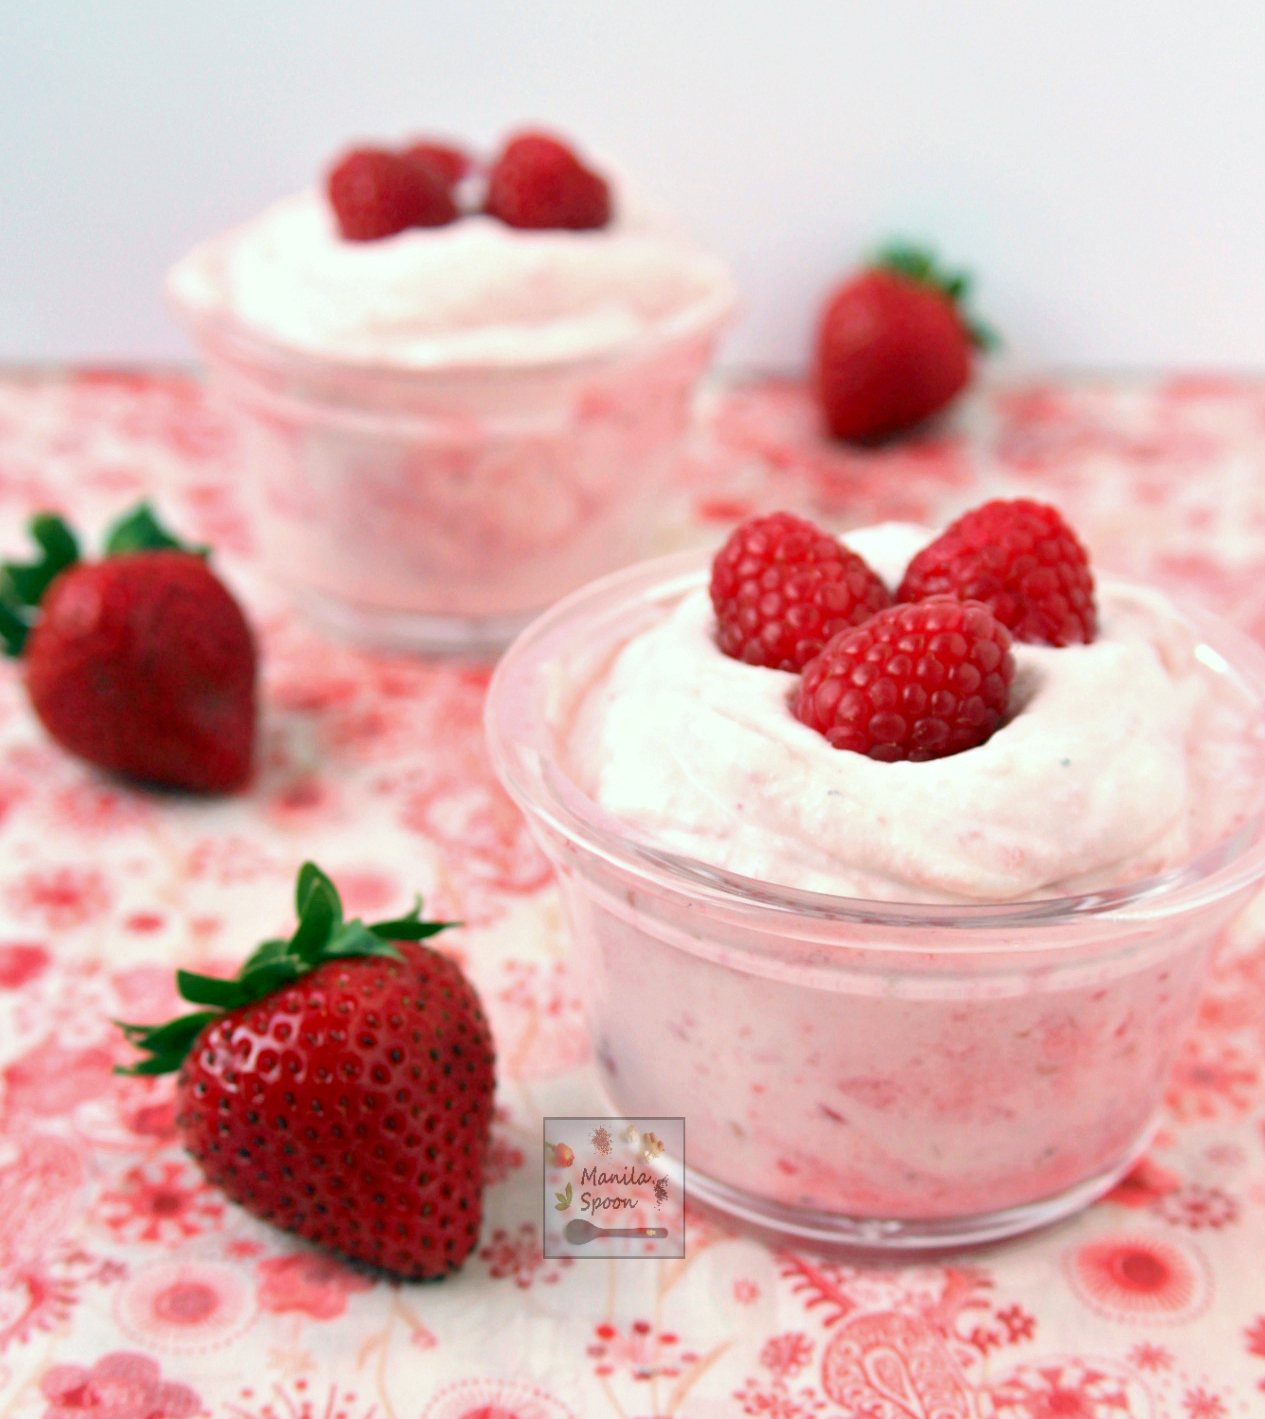 A yummy, quick and super-easy way to enjoy summer berries! Puree the berry or fruit of choice, fold into the sweetened whipped cream and voila - a fruity-licious and creamy Strawberry and Raspberry Fool that everyone will love! #strawberryfool #raspberryfool #englishdessert #summer